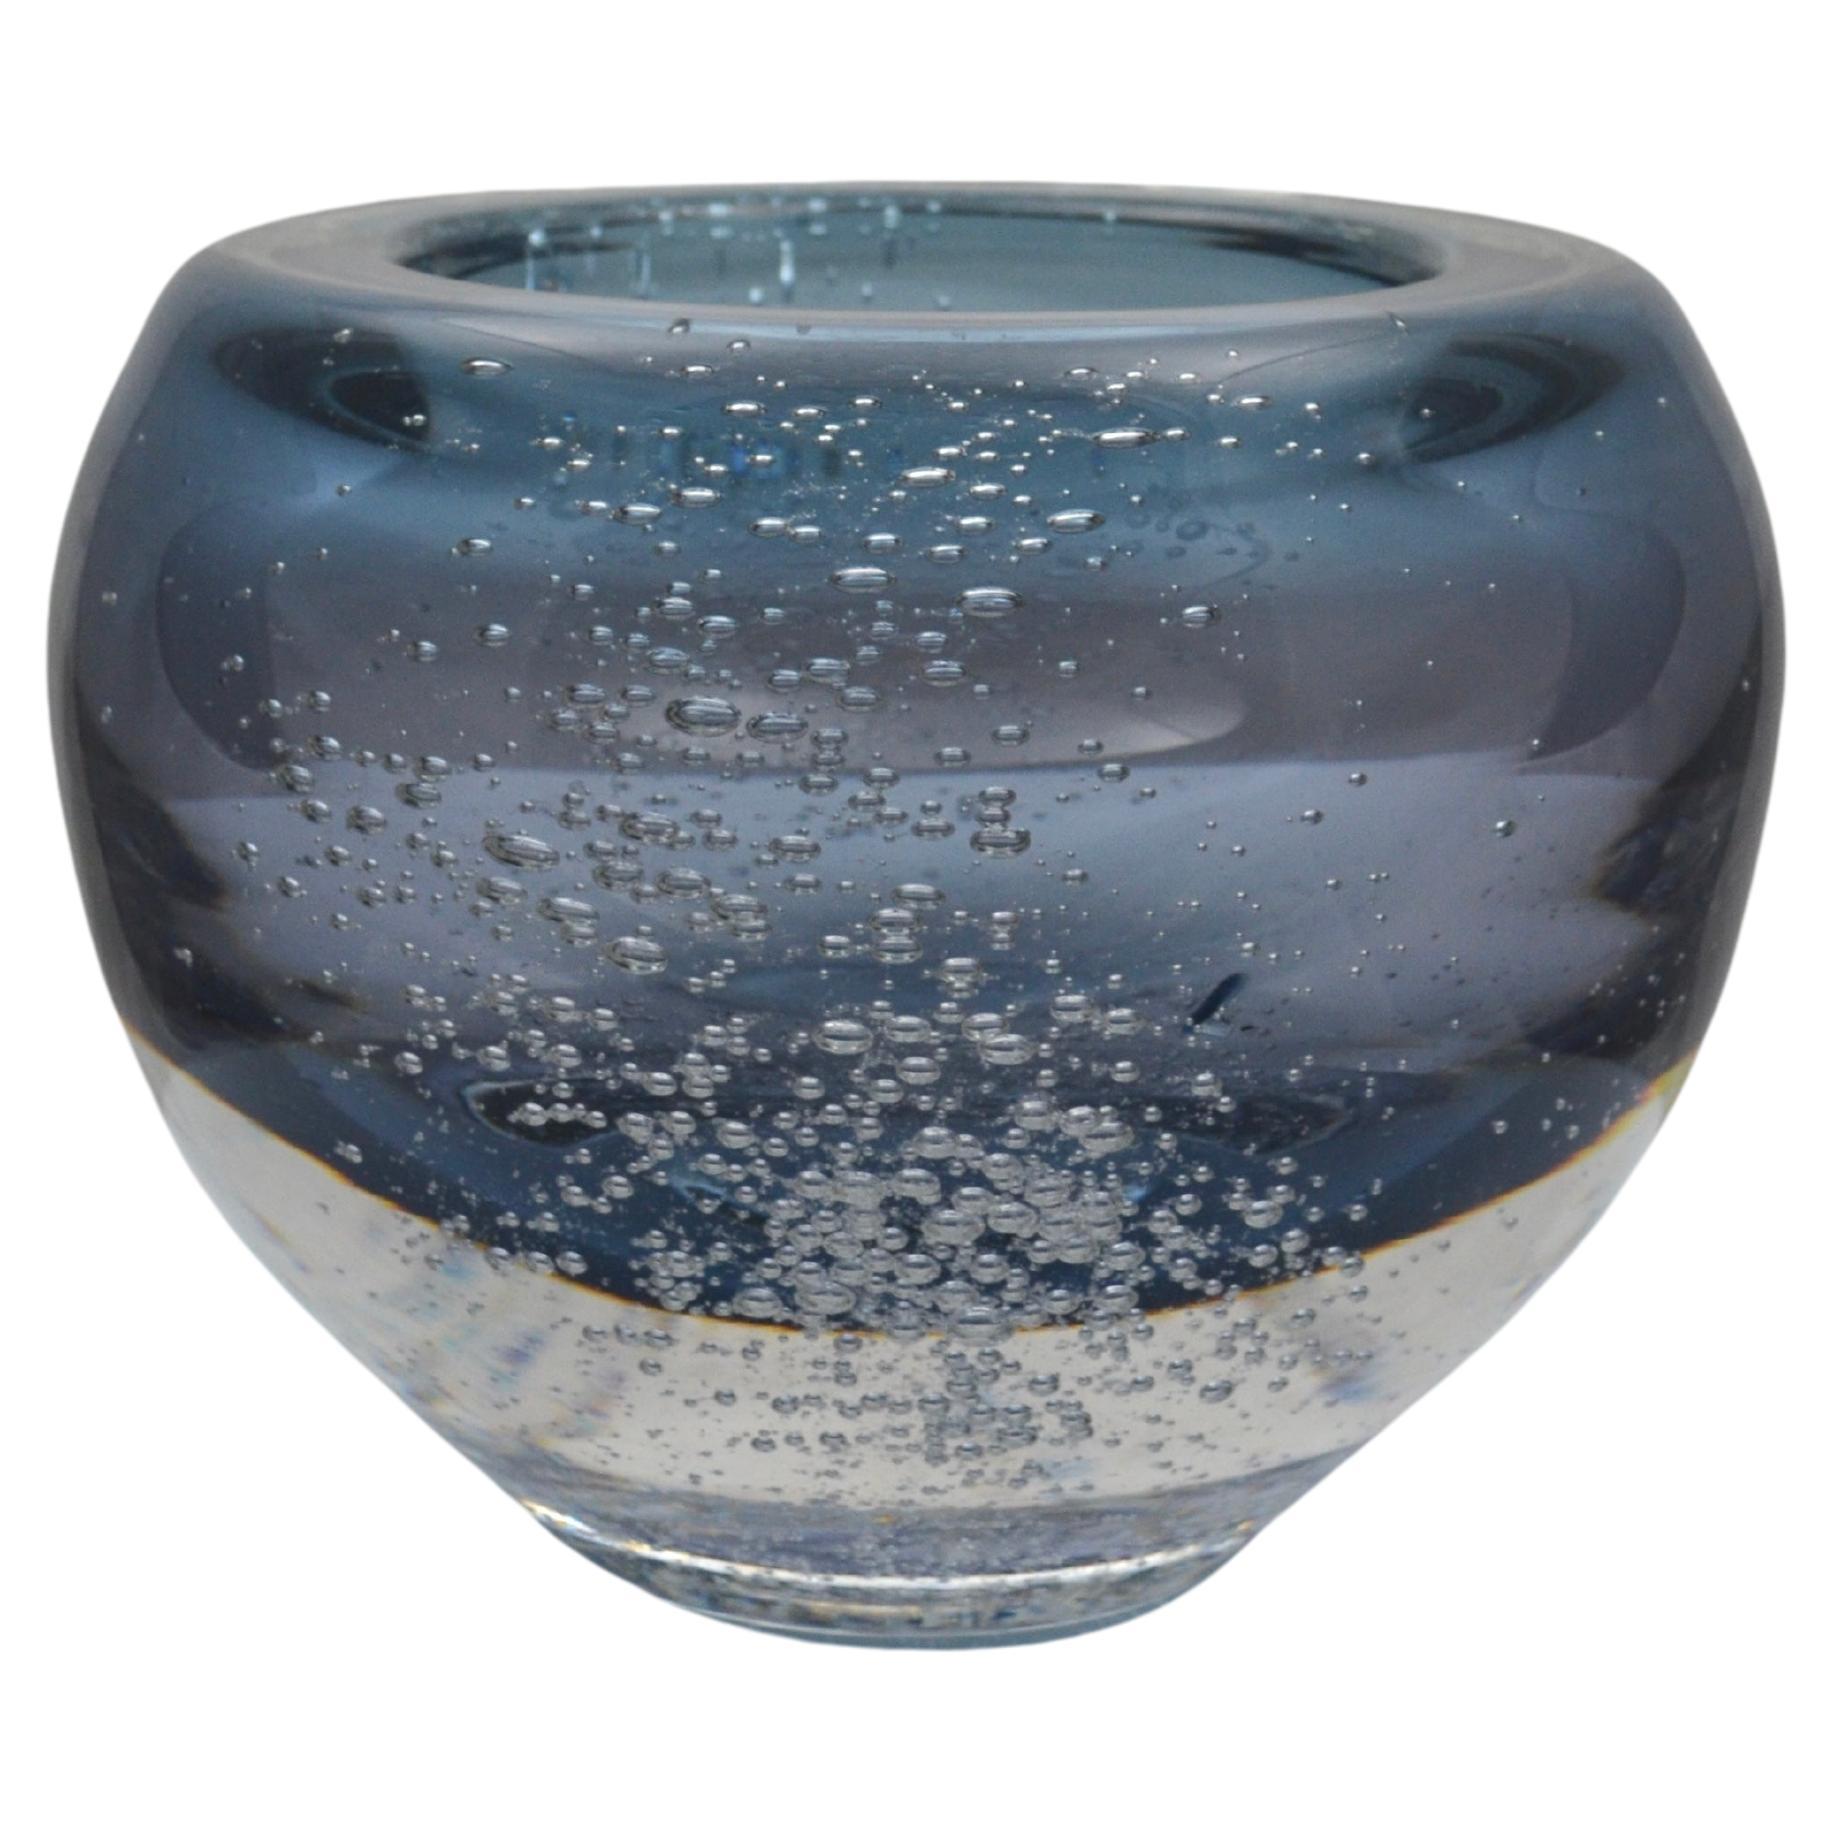 "Bowl Bubbles" Eco-Crystal Vase from Bf Glass Studio, 2021